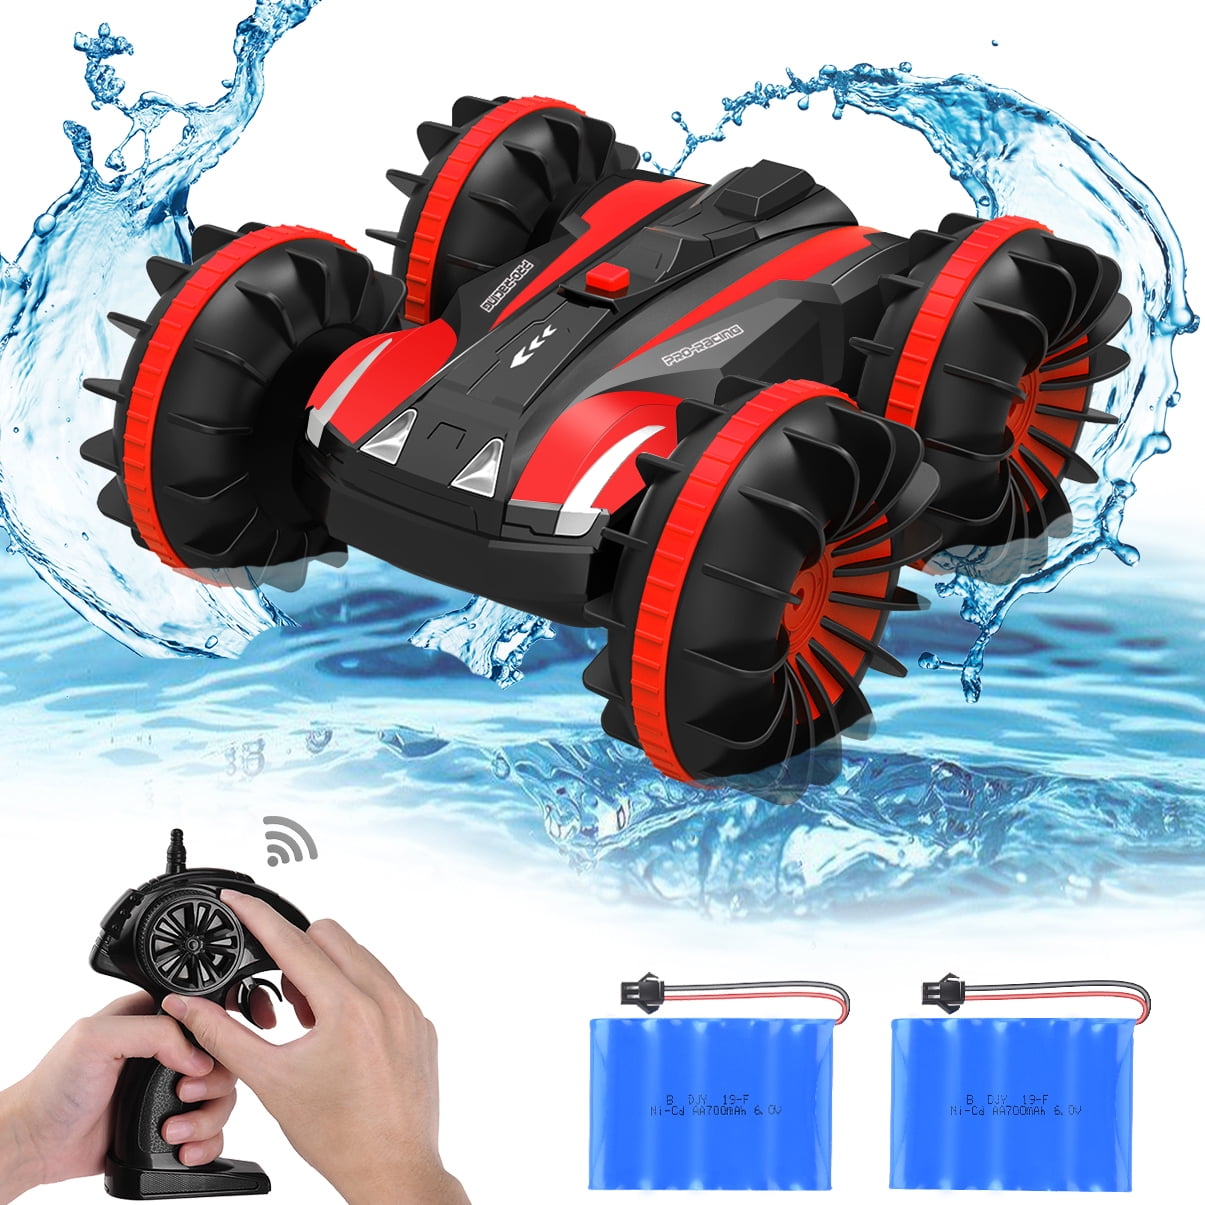 Details about   Rocket RC Air Crawler Palm Sized High Performance Stunt Drone Red NEW